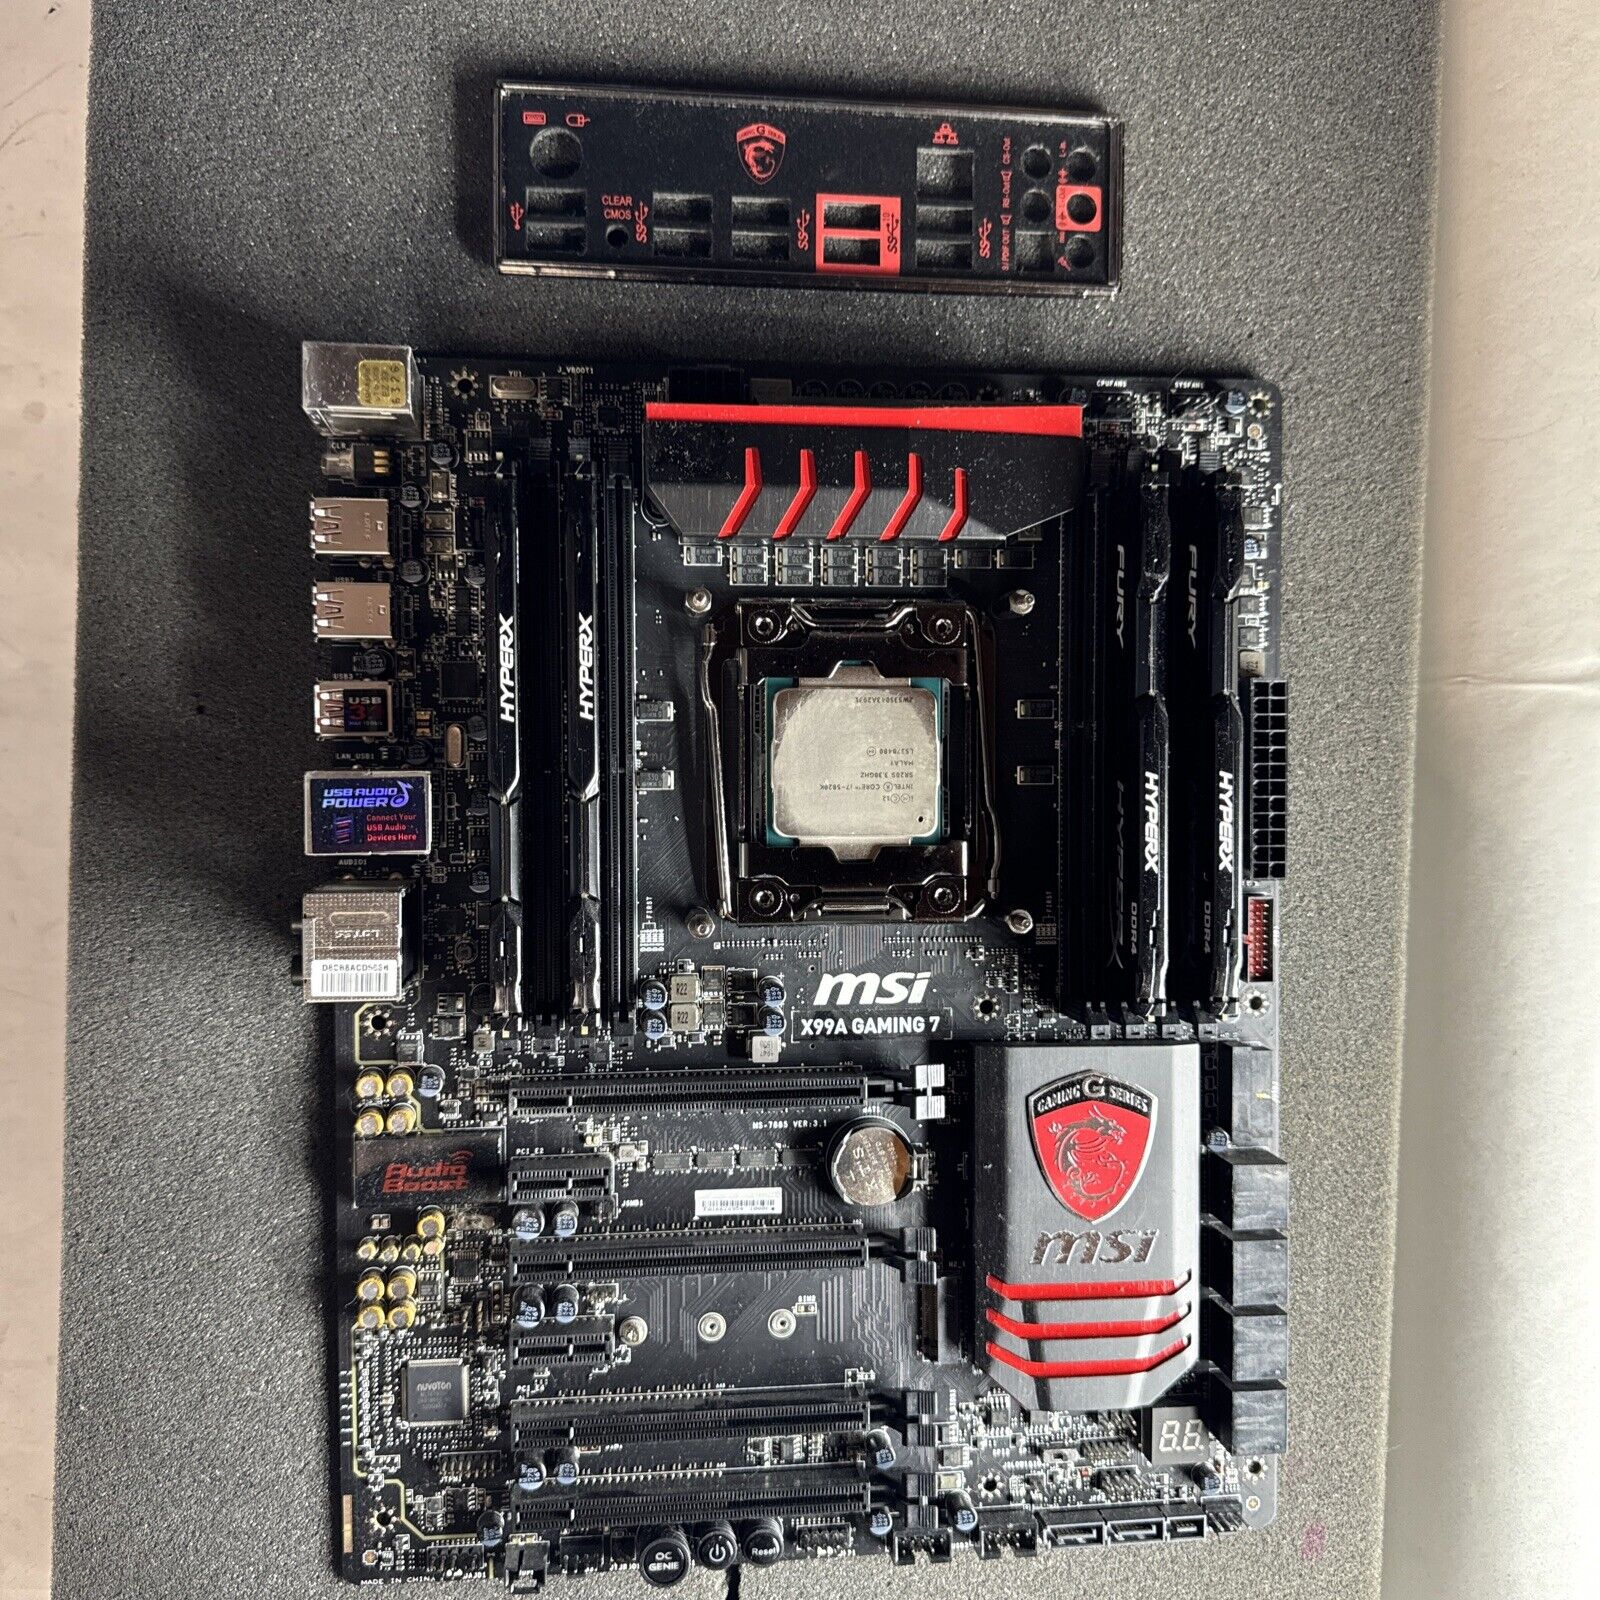 MSI x99a motherboard gaming 7 + Intel core i7-5820k 3.30ghz 6core 32G Ram DDR4